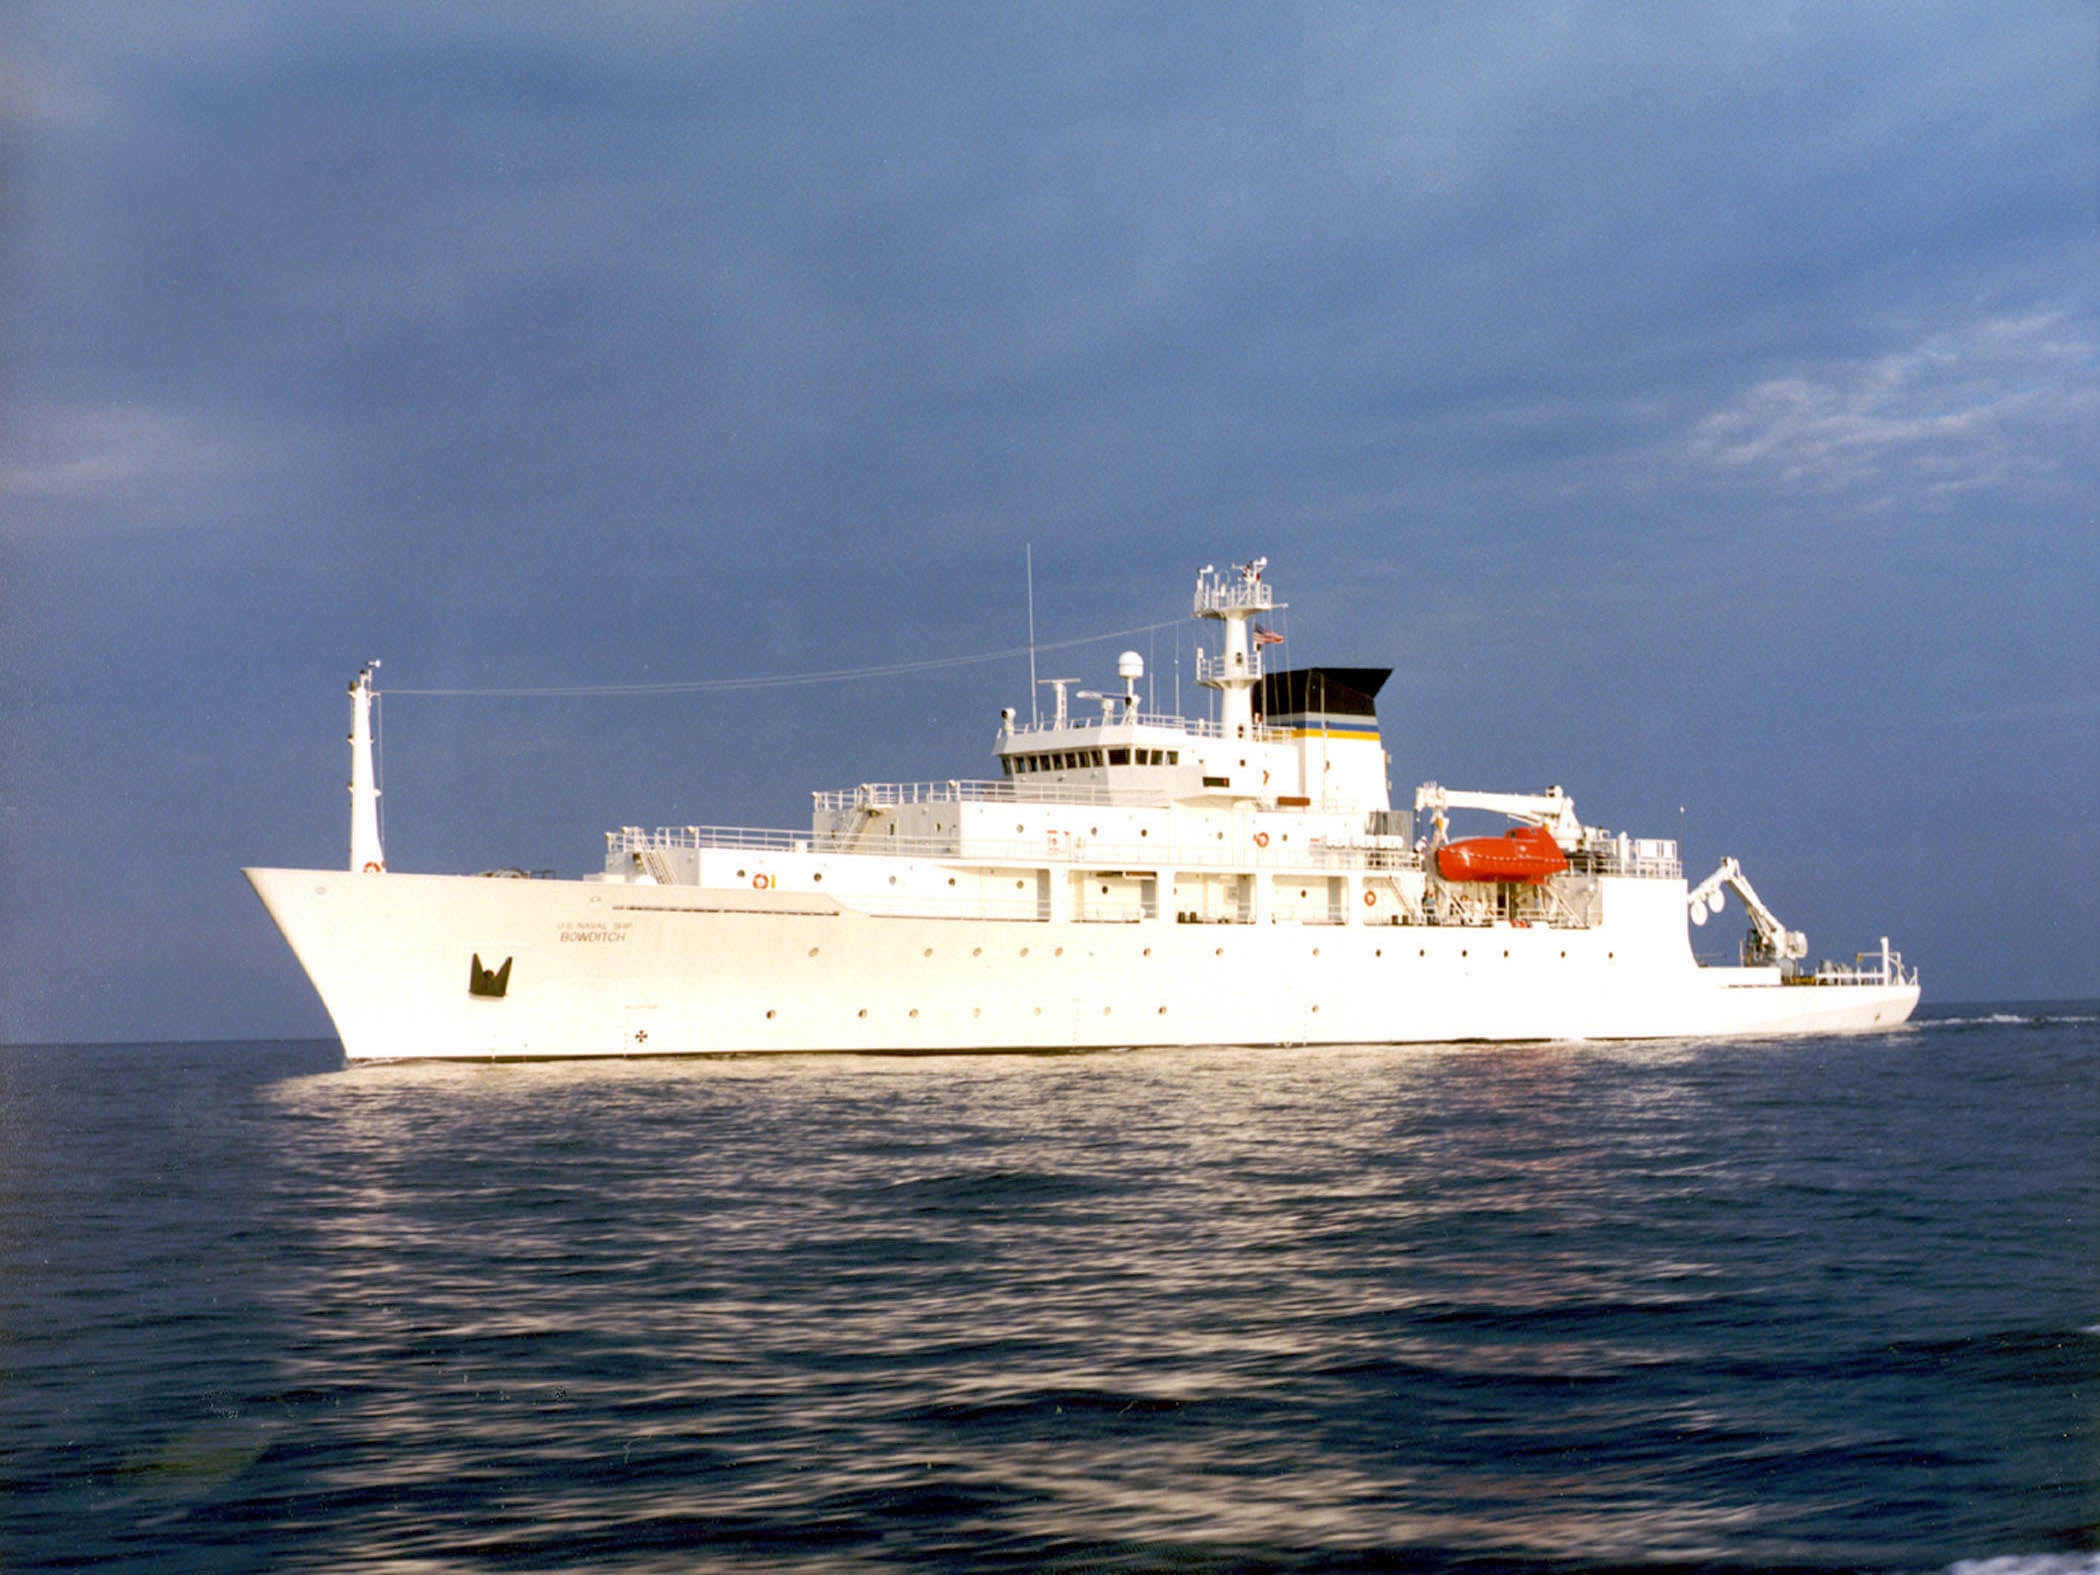 USNS Bowditch was recovering two drones last Thursday when a Chinese navy ship approached and sent out a small boat that took one of them, the Pentagon said